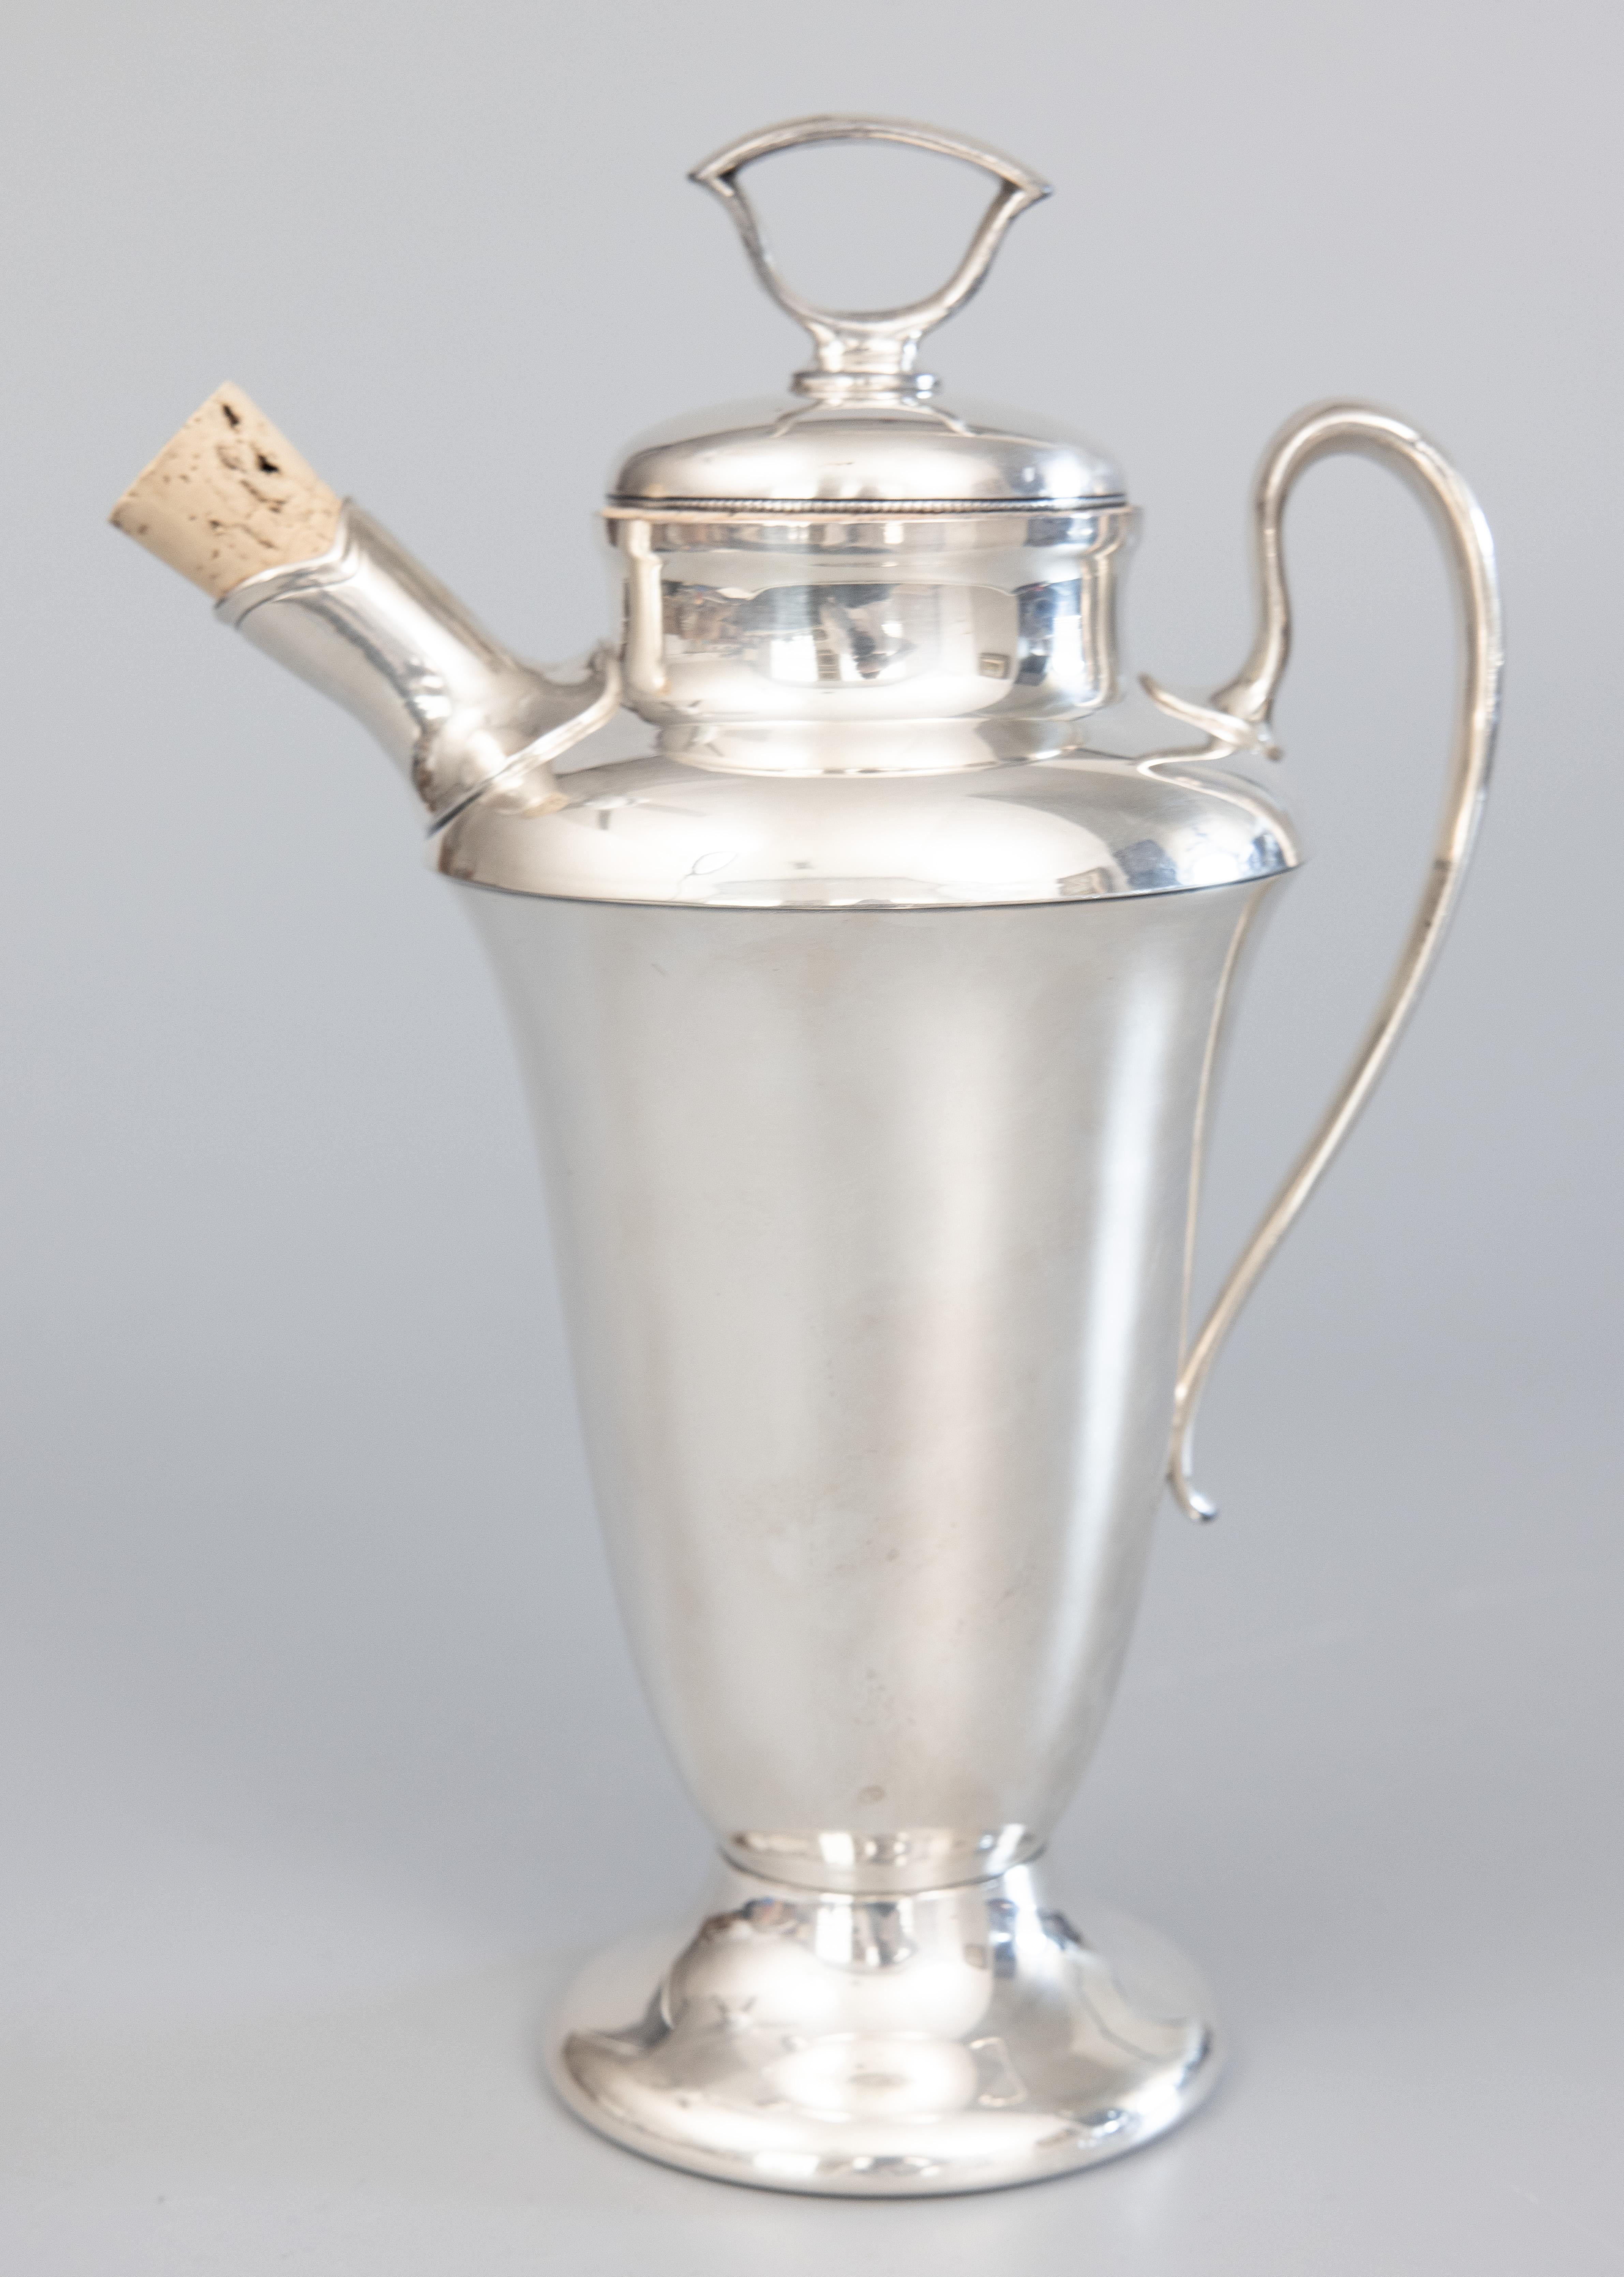 A sleek and stylish 1920s Art Deco English silverplate cocktail or martini shaker with removable cap and cork. Hallmarked on reverse. It's decorative and functional, perfect as a gift or for your next party.

